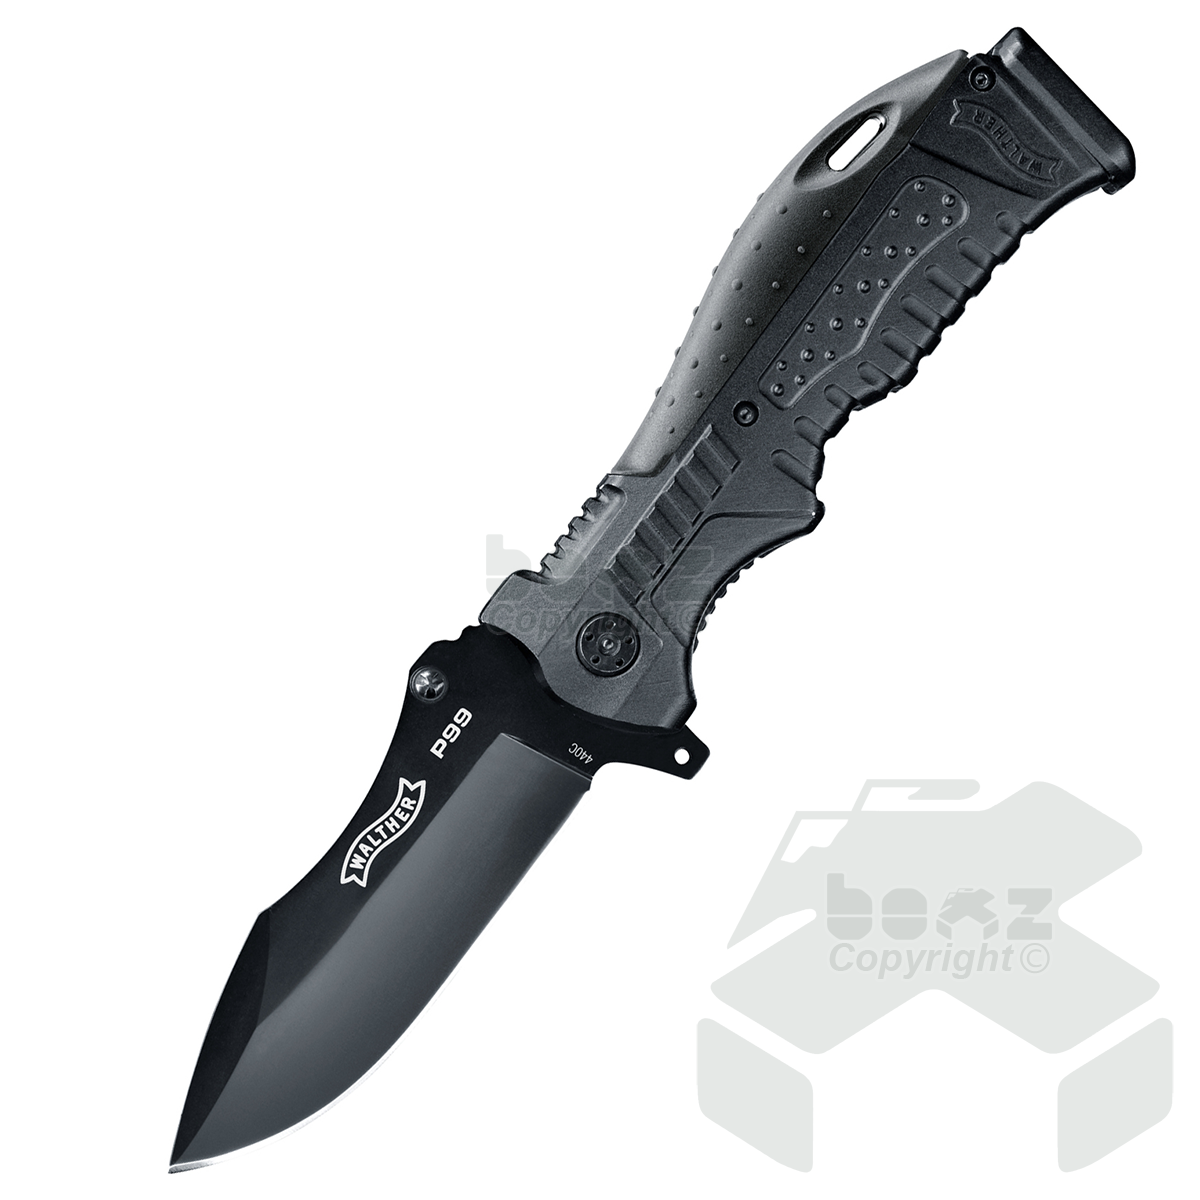 Walther Tactical Knife p99